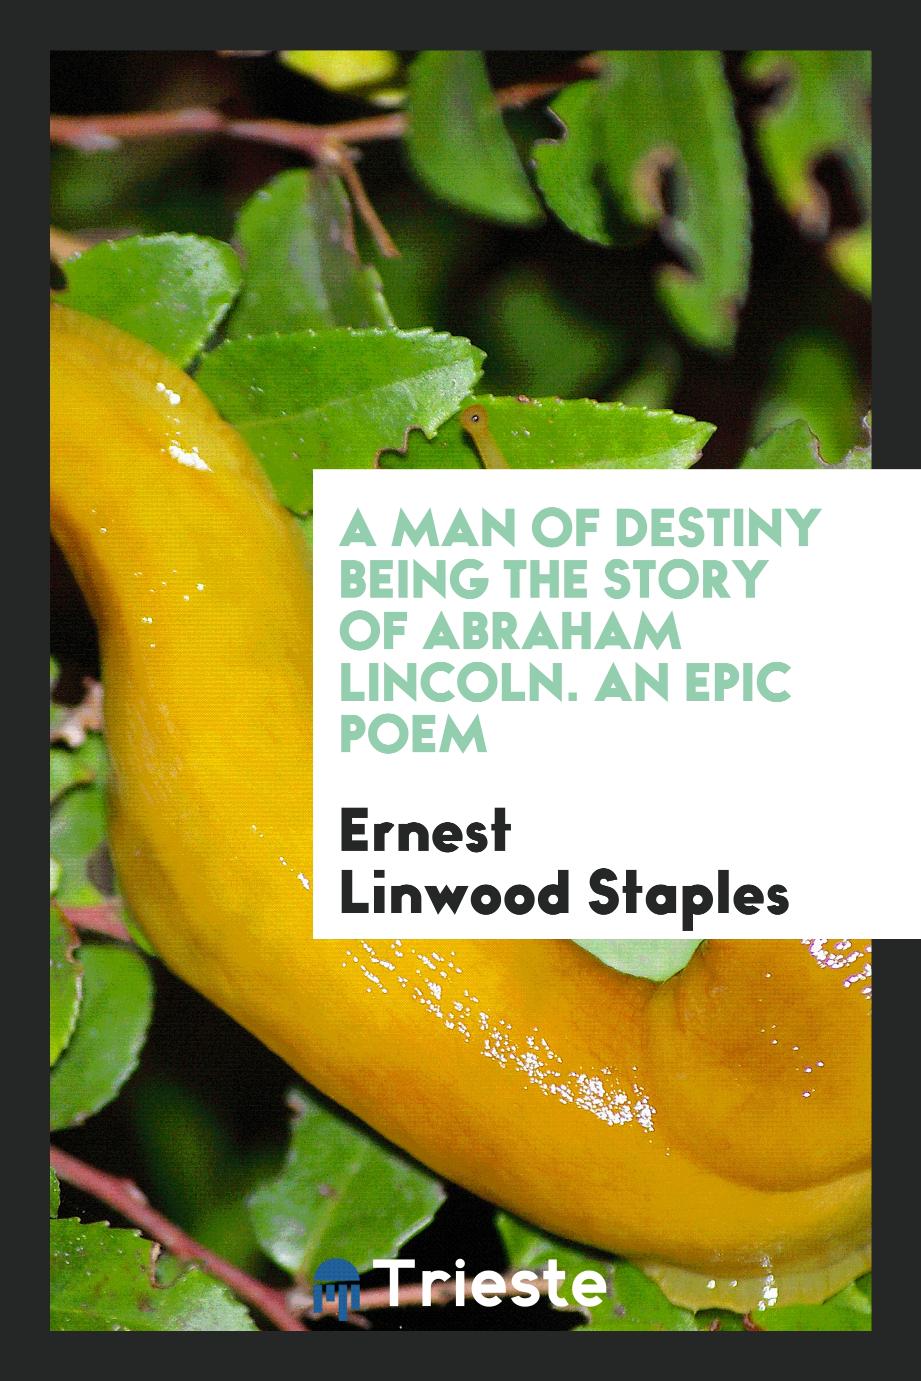 A Man of Destiny being the Story of Abraham Lincoln. An Epic Poem